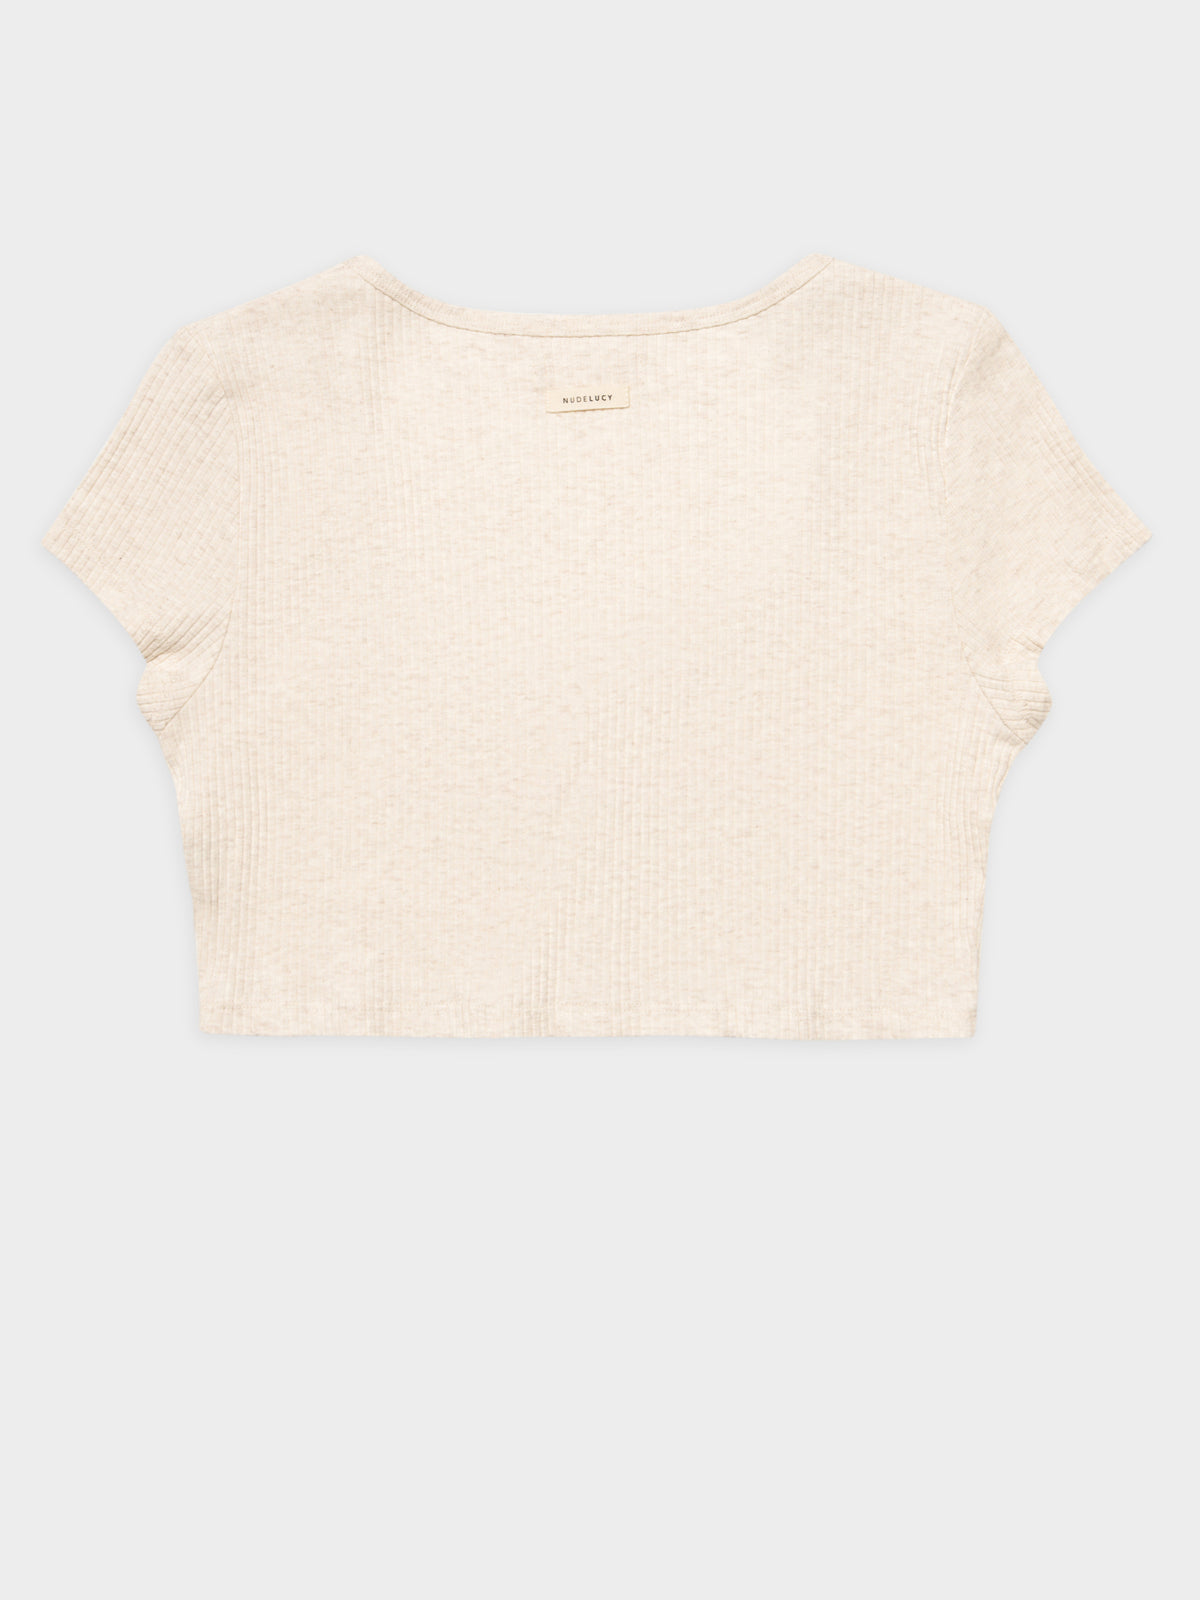 Ribbed Lounge Button T-Shirt in Cream